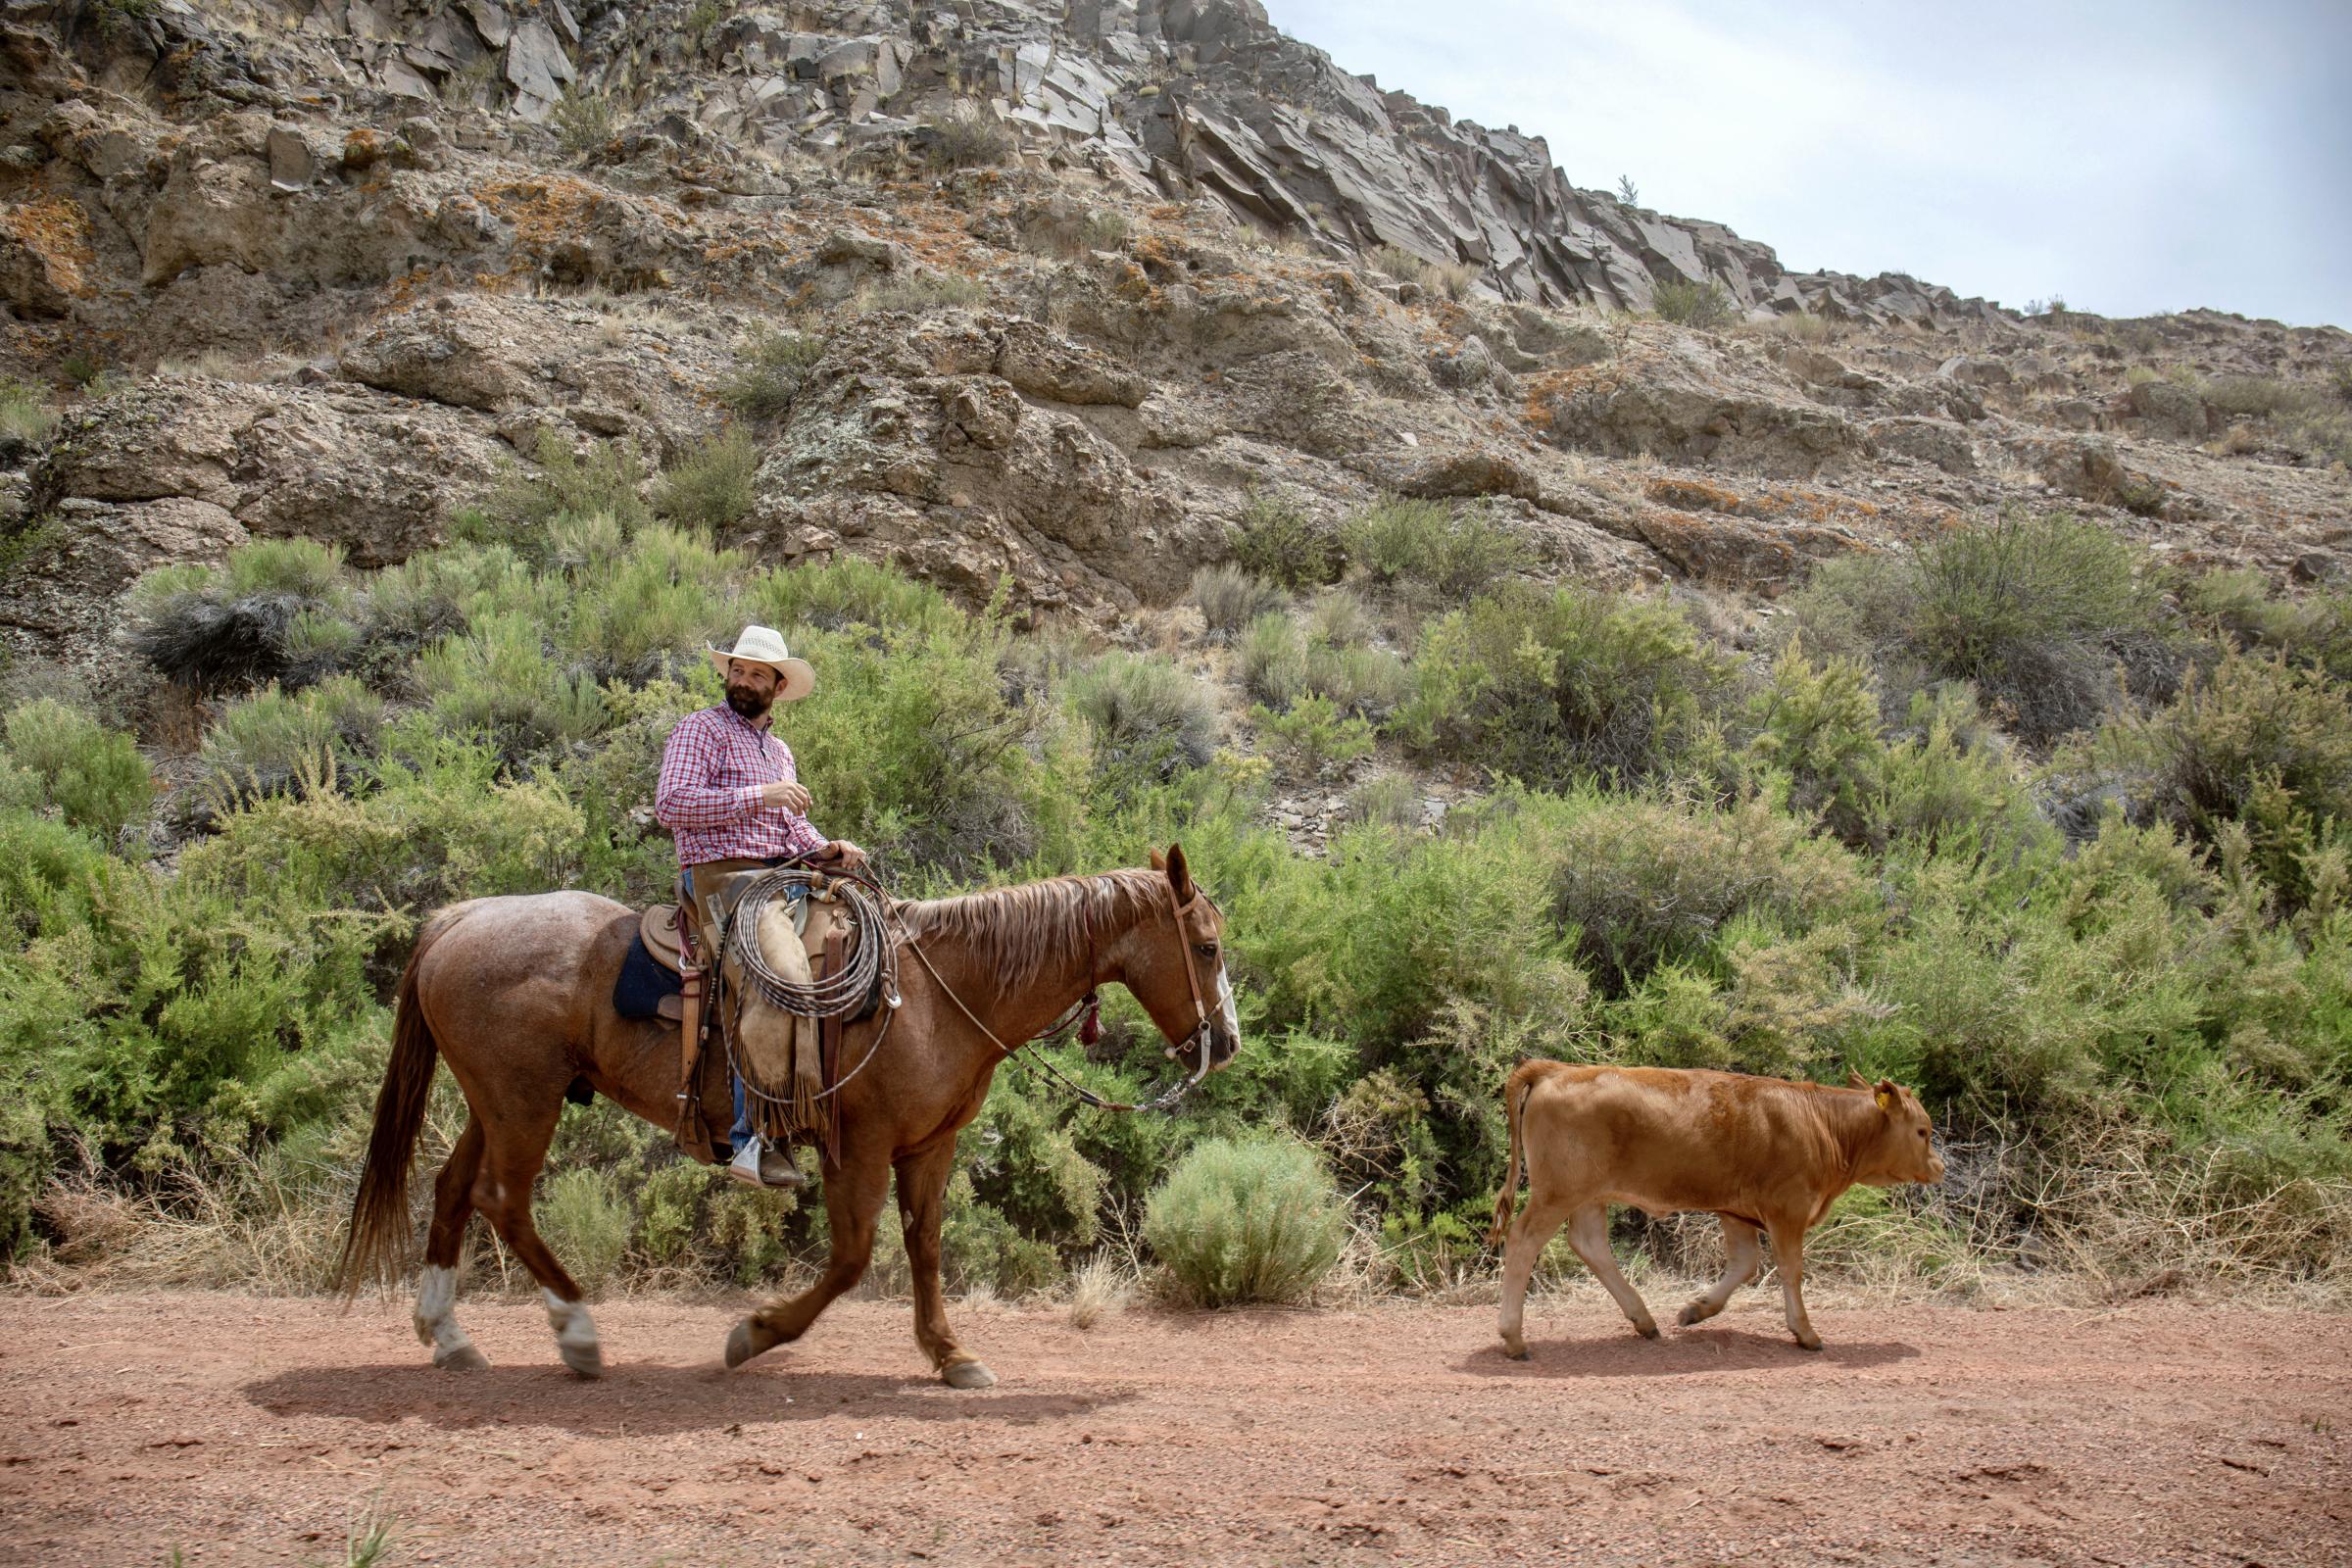 Crisis on the Rio Grande - MONTE VISTA, Colo. &mdash; Kyler Brown drives a calf on June 21, 2022 as part of a drive that...